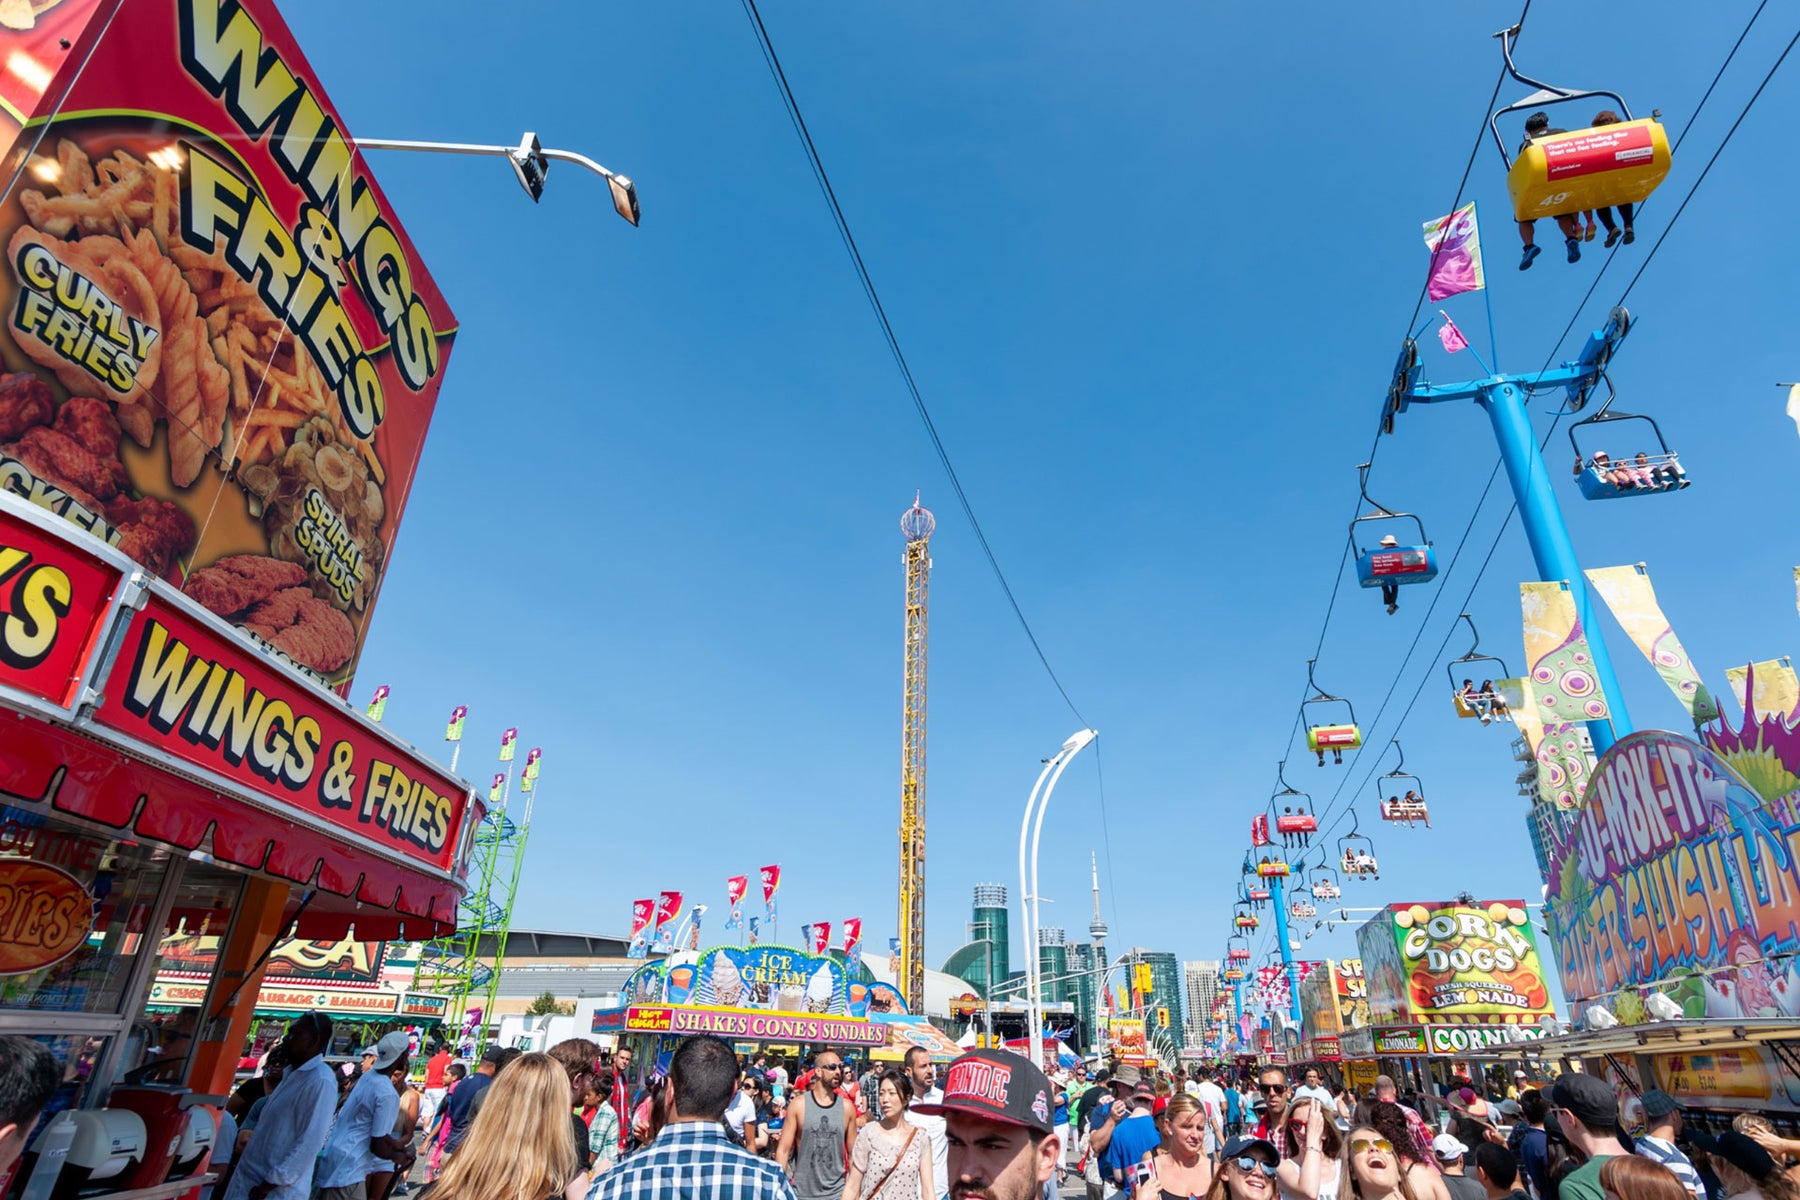 Toronto’s Annual Exhibition packed with crowds and concession stand options